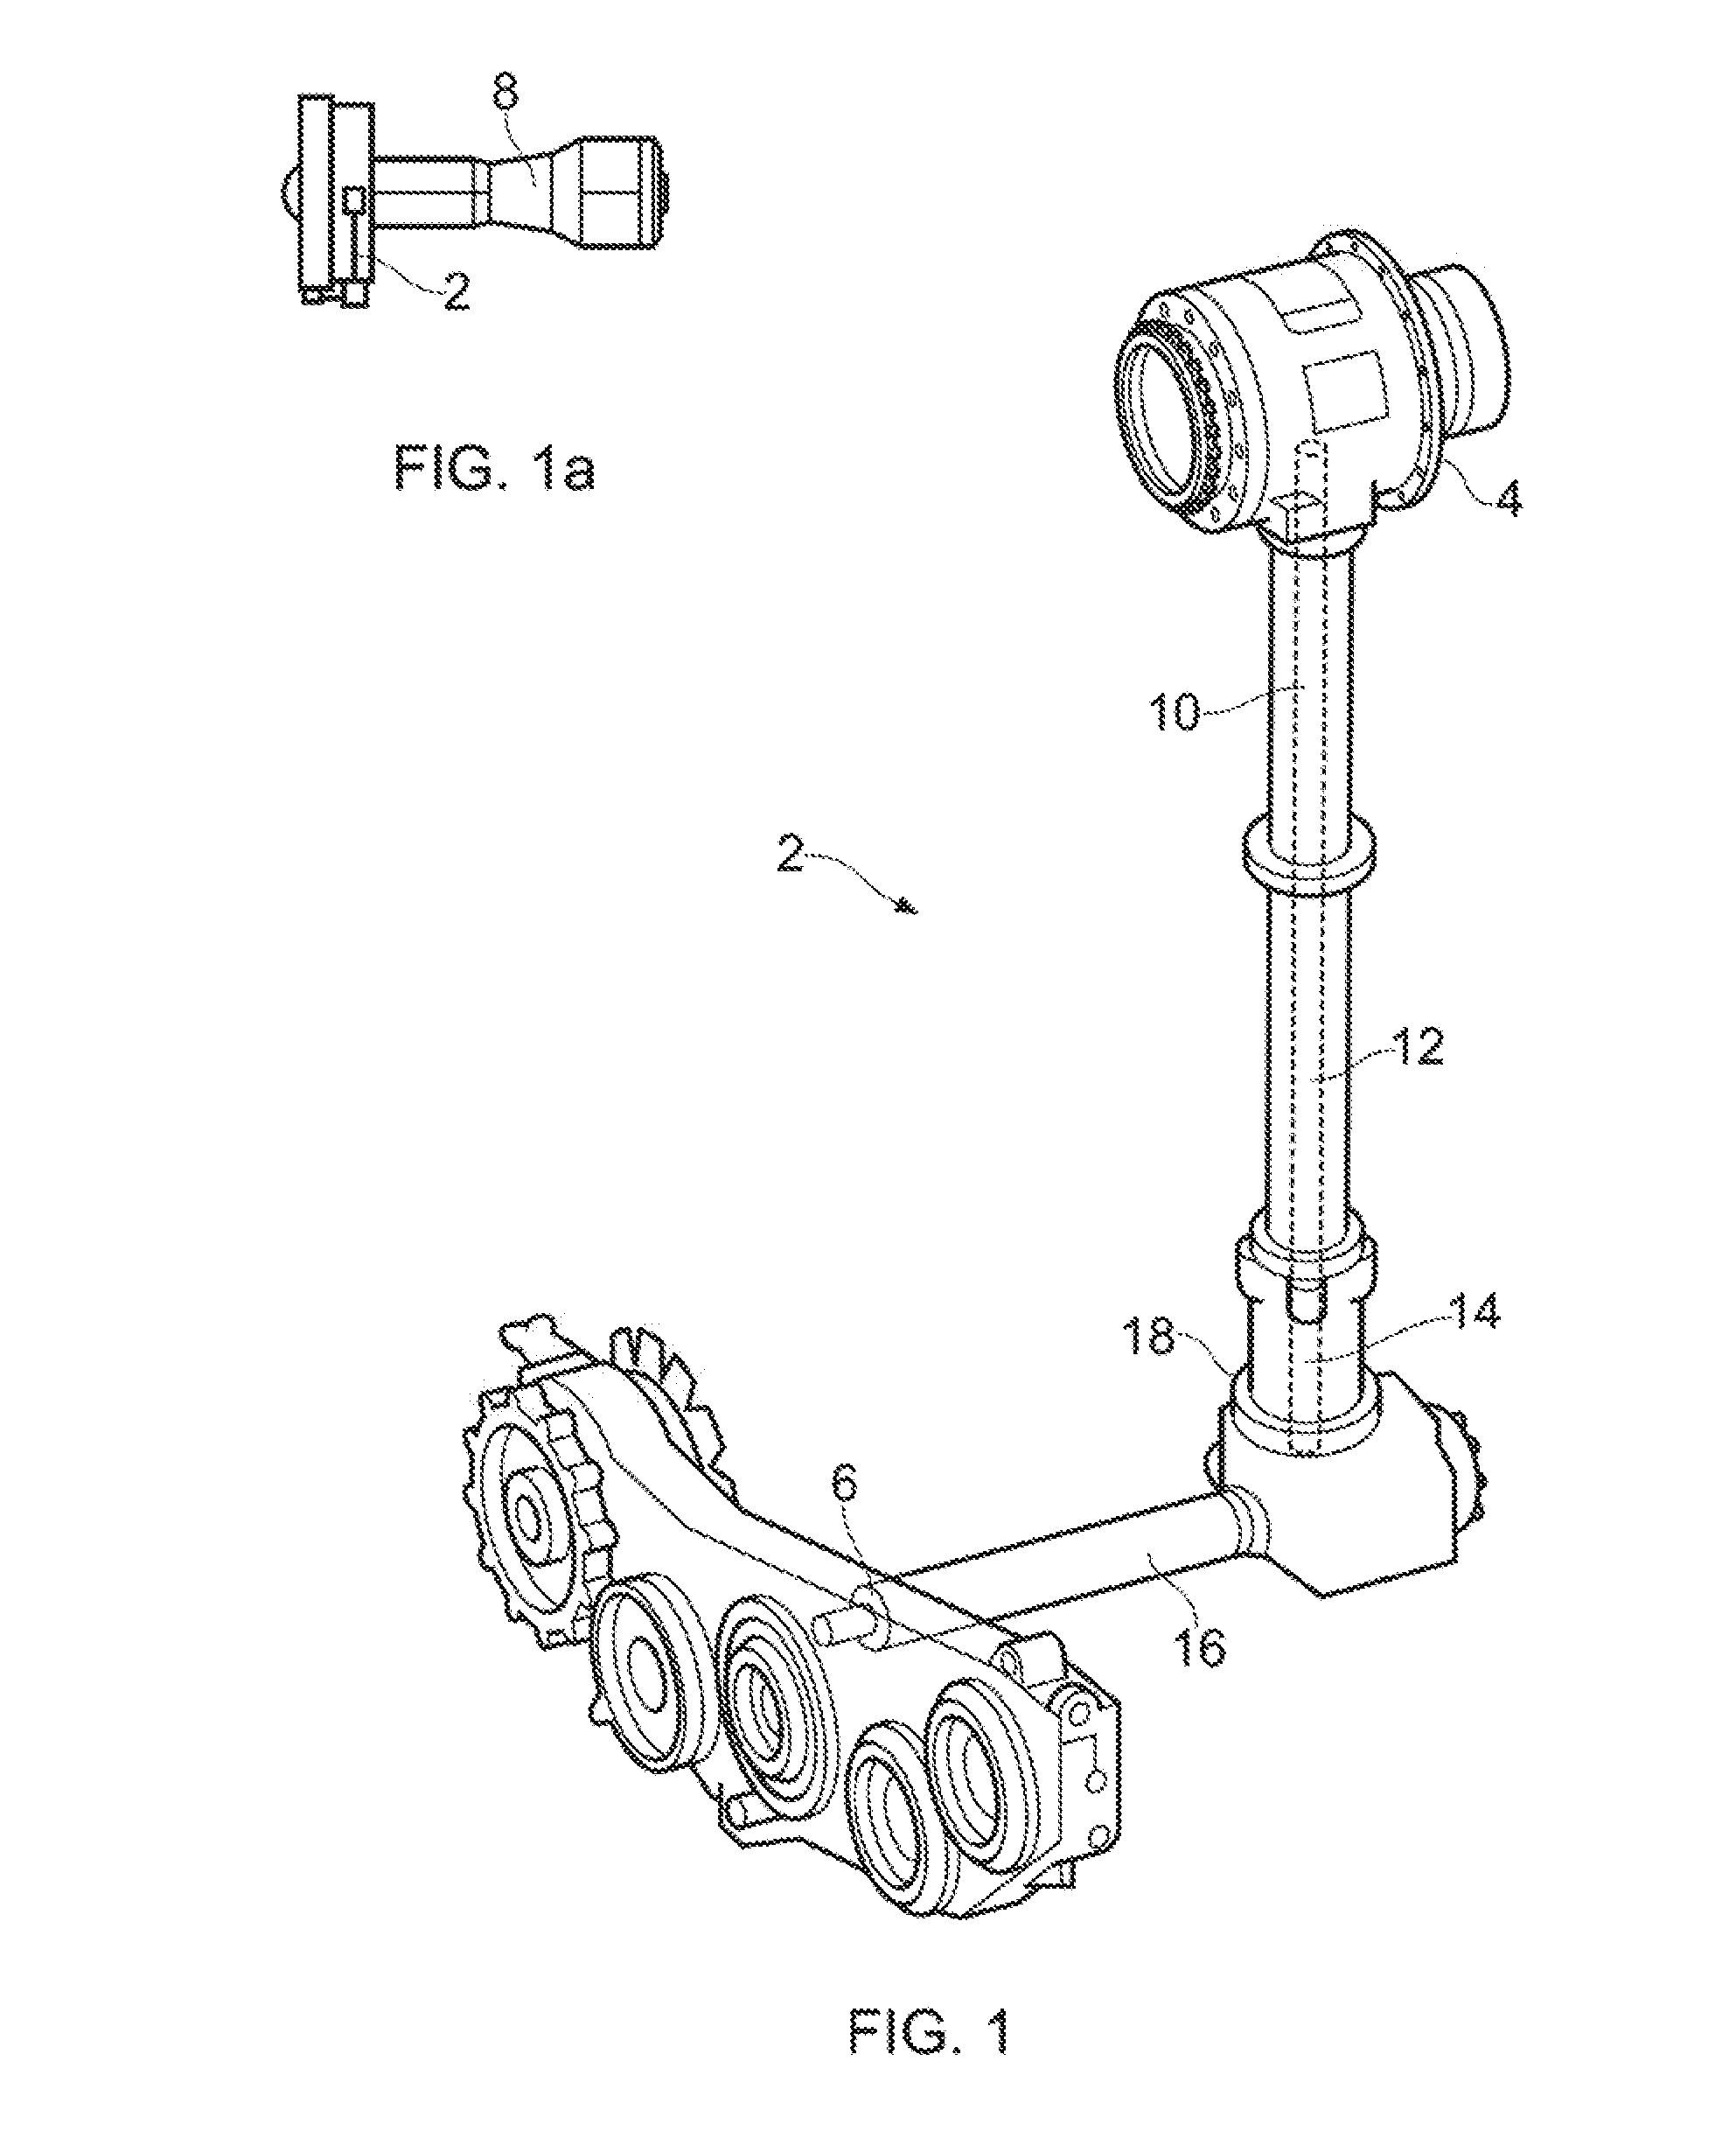 Method and system for damping torsional oscillations